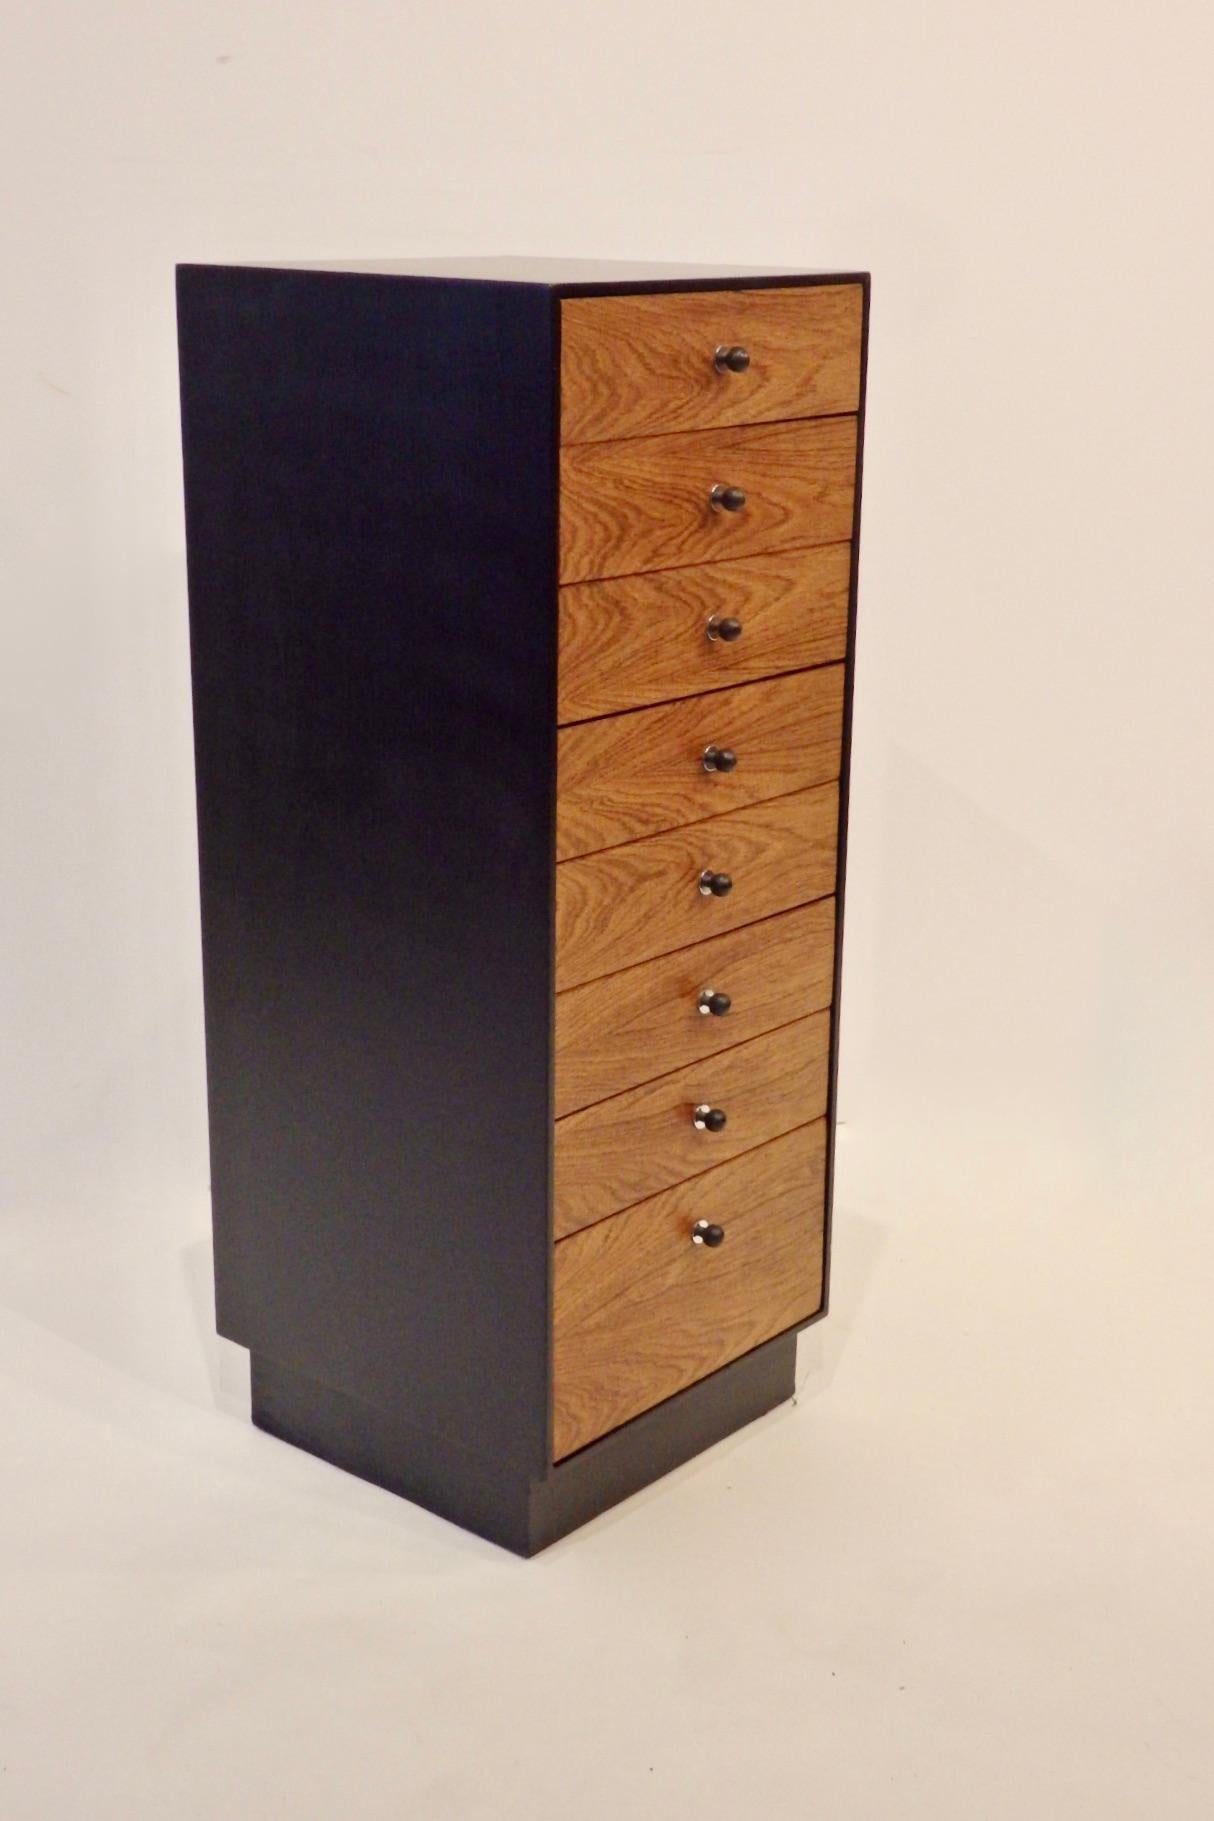 Black satin finished lingerie or linen cabinet with rosewood face drawers having cast iron ball pulls with chrome backplate. Designed by David Parmelee for Founders furniture.